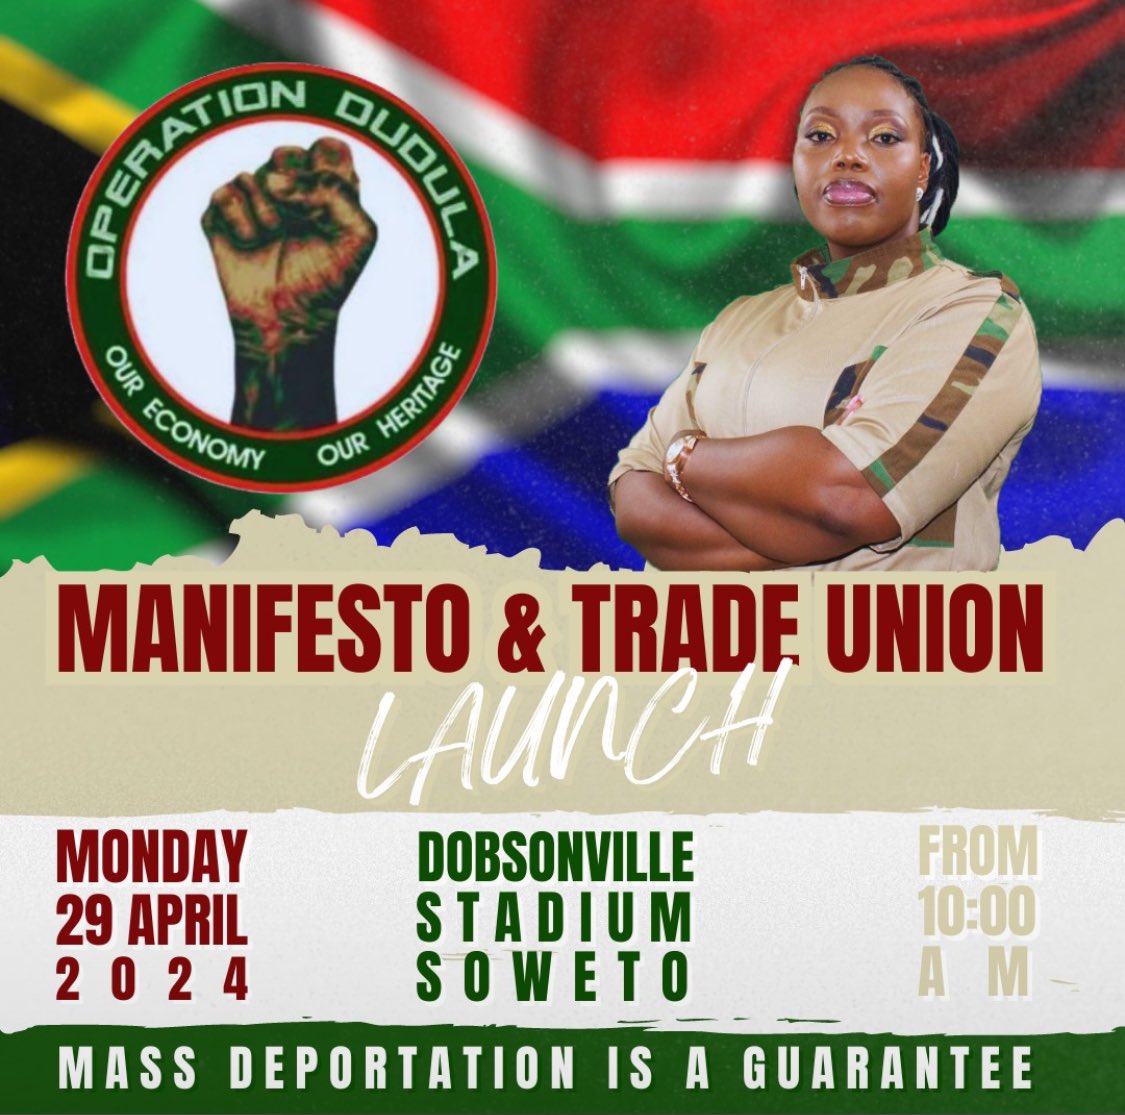 It's a date Patriots 👇👇 on 29. Commander morning🇿🇦✊. Plus how fix this bad @constitution. Especially Patriots that give @eff their voter, fix that. #Foreignersmustgo by Force